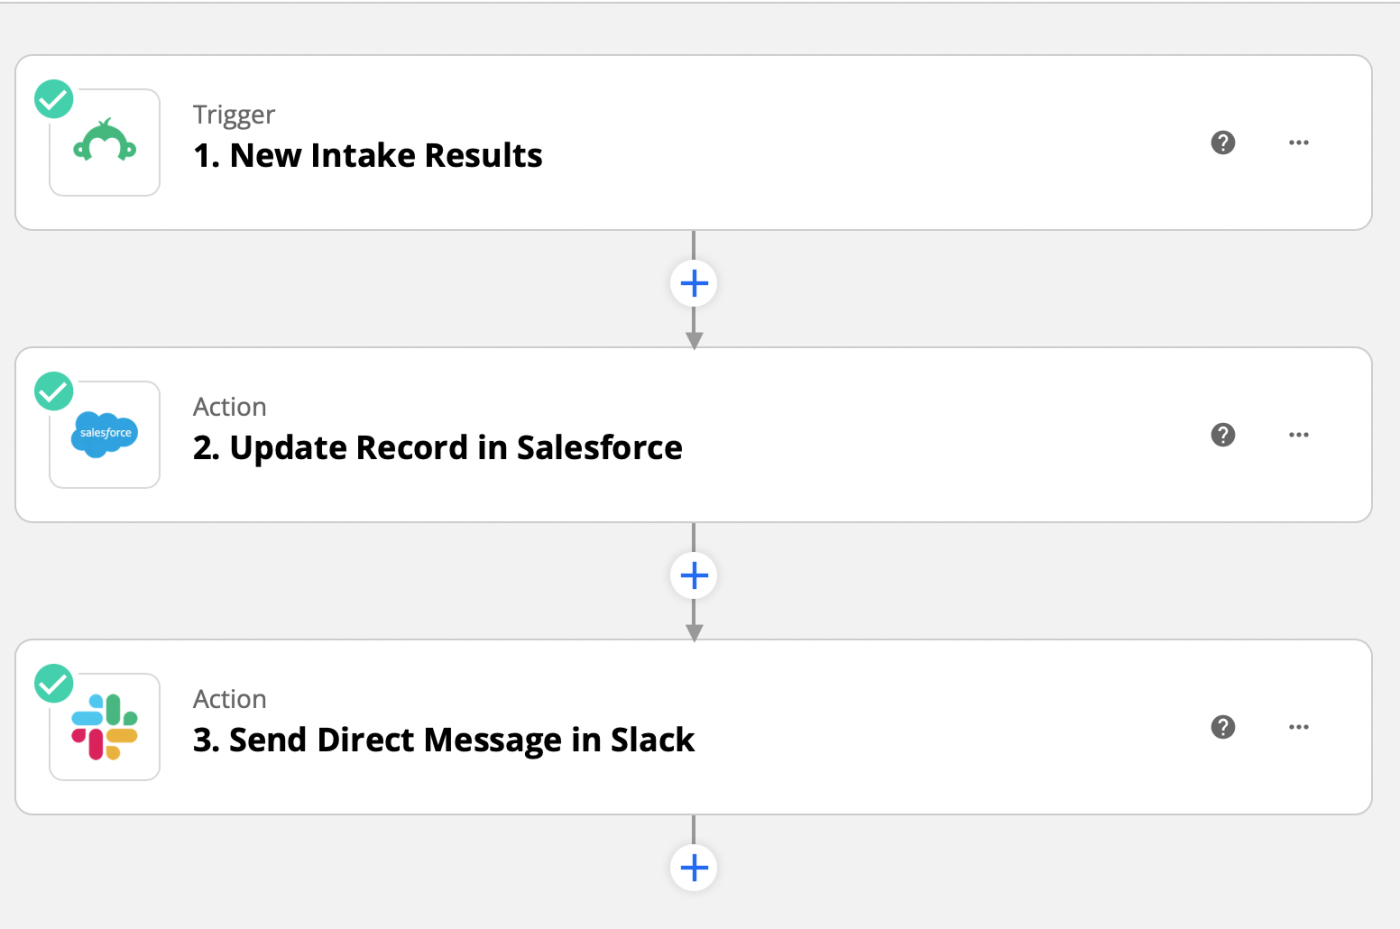 An example of a simple three-step Zap: from SurveyMonkey to Salesforce to Slack